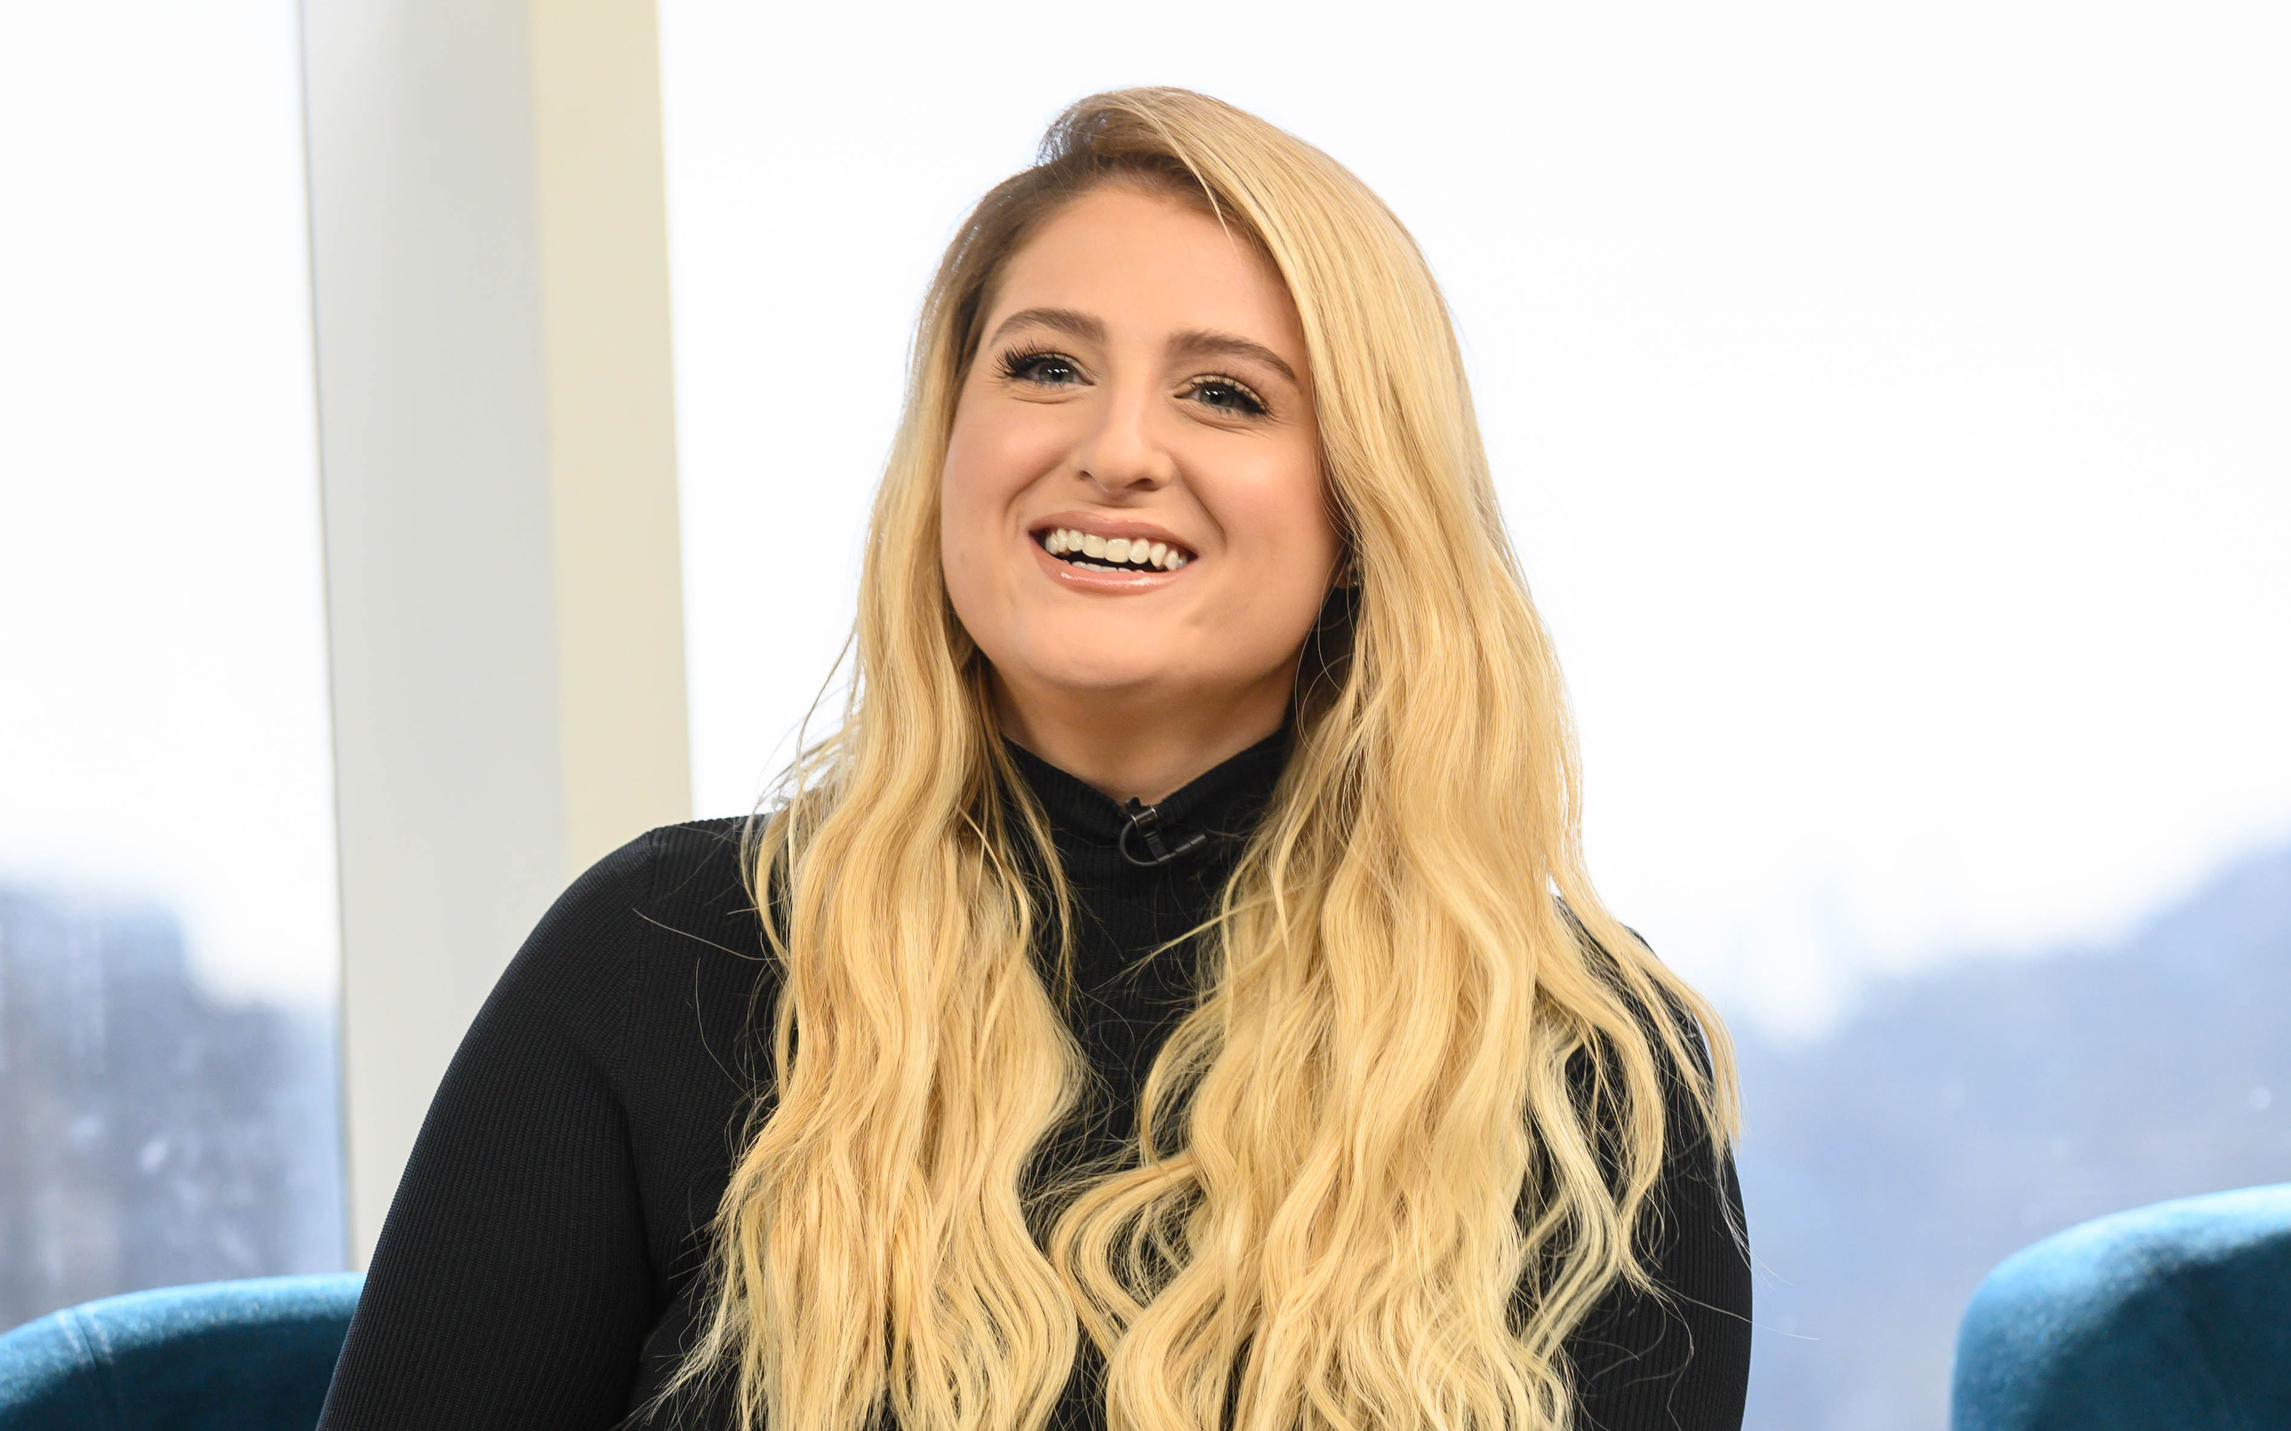 Meghan Trainor Faces Backlash After She Says ‘F*** Teachers,’ Issues Apology